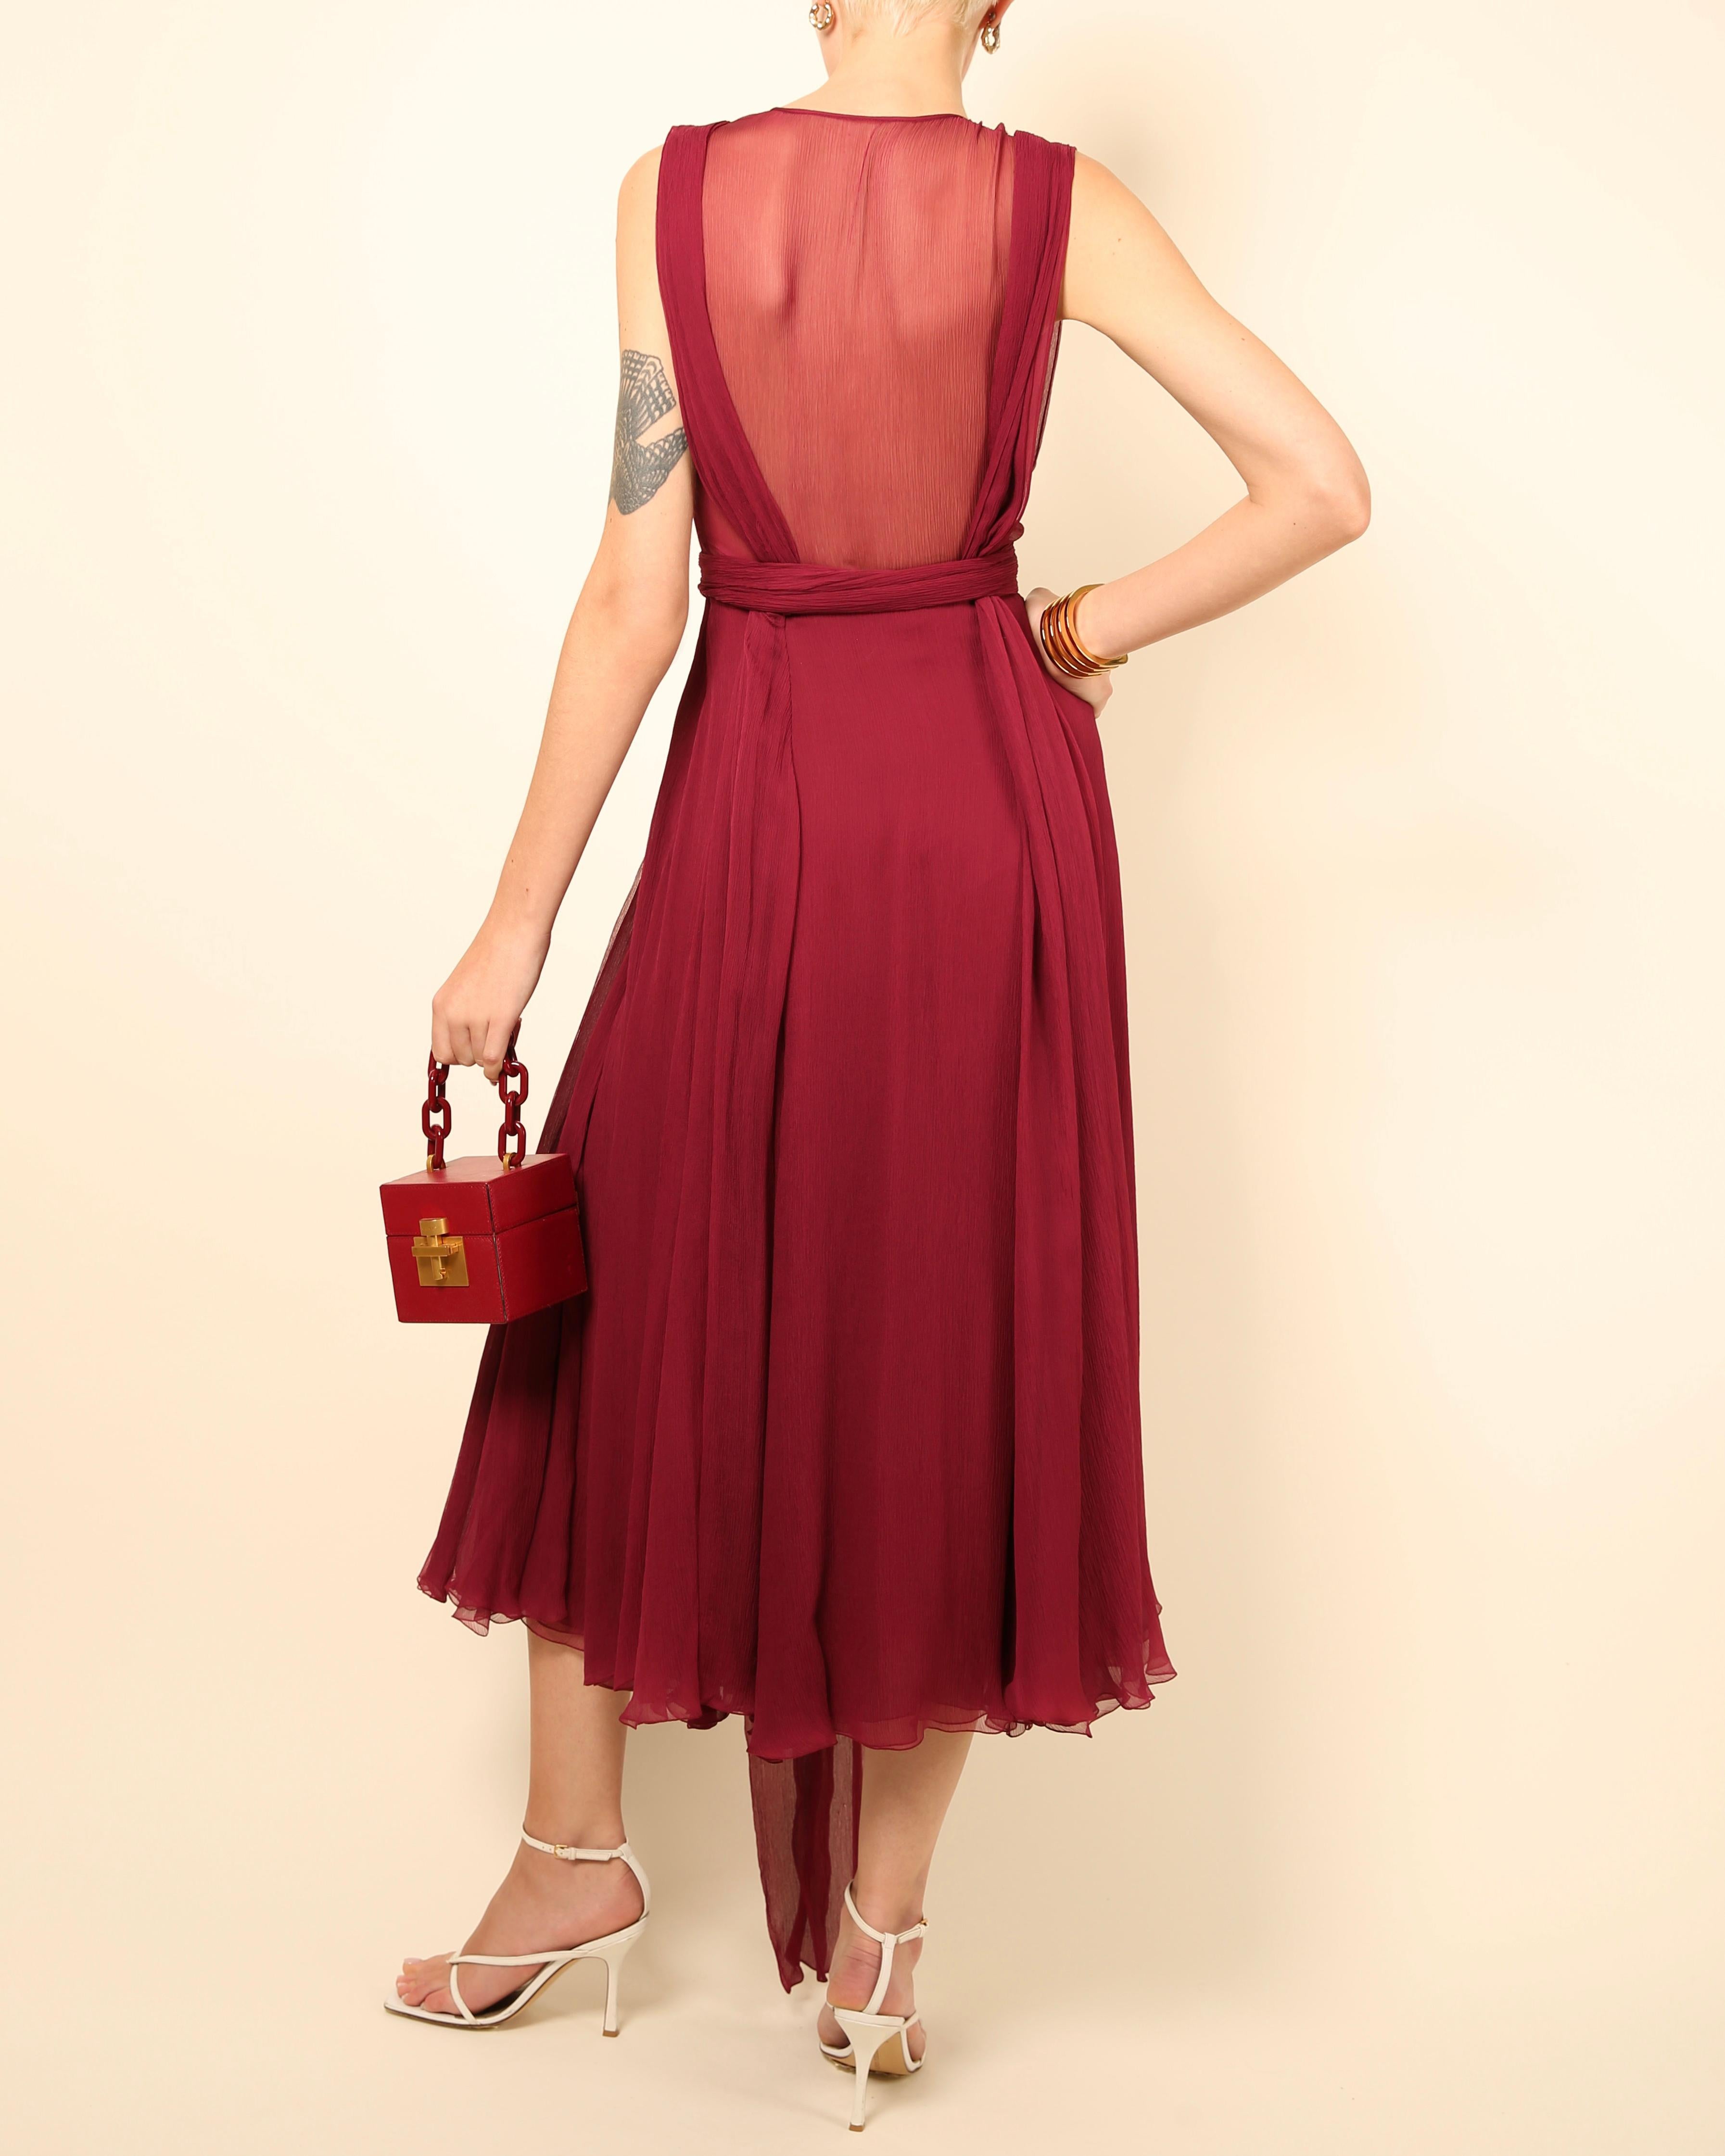 Gucci Fall 2011 burgundy chiffon silk plunging neckline sheer cut out gown dress For Sale 7